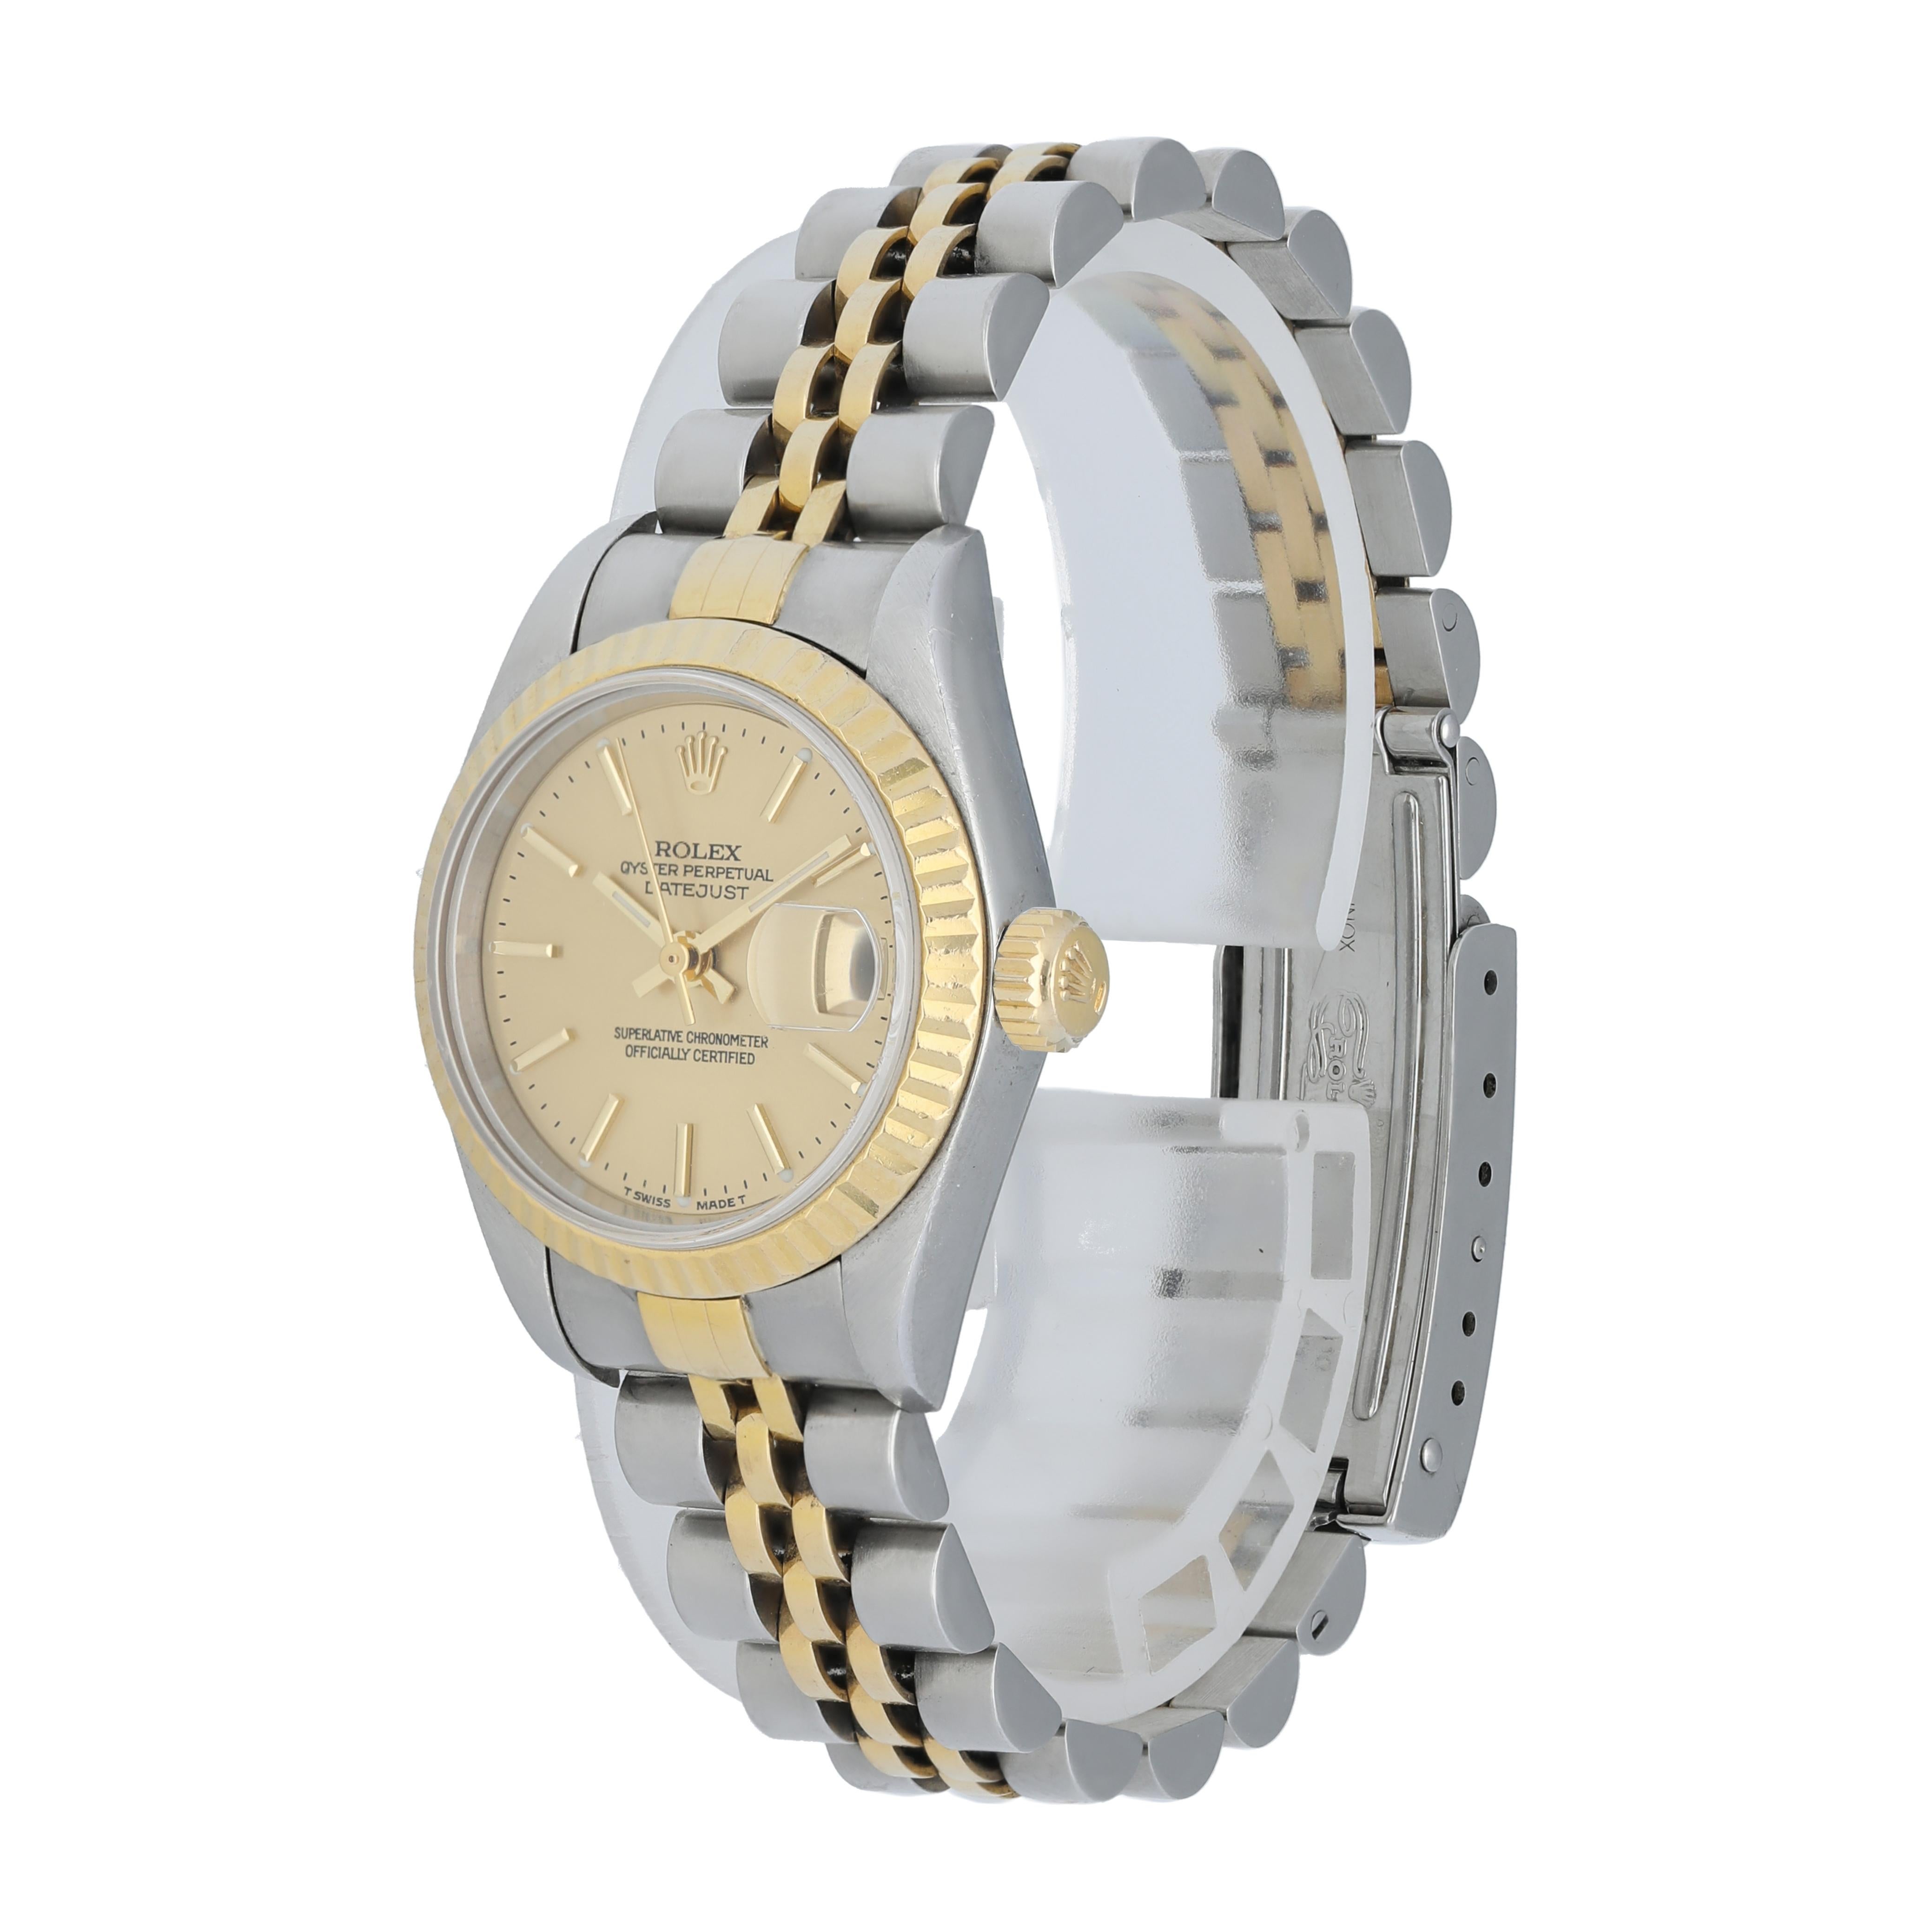 Rolex Datejust 79173 Ladies Watch.
26mm Stainless Steel case. 
Yellow Gold fluted bezel. 
Champagne dial with gold hands and index hour markers. 
Minute markers on the outer dial. 
Date display at the 3 o'clock position. 
Stainless Steel & 18K